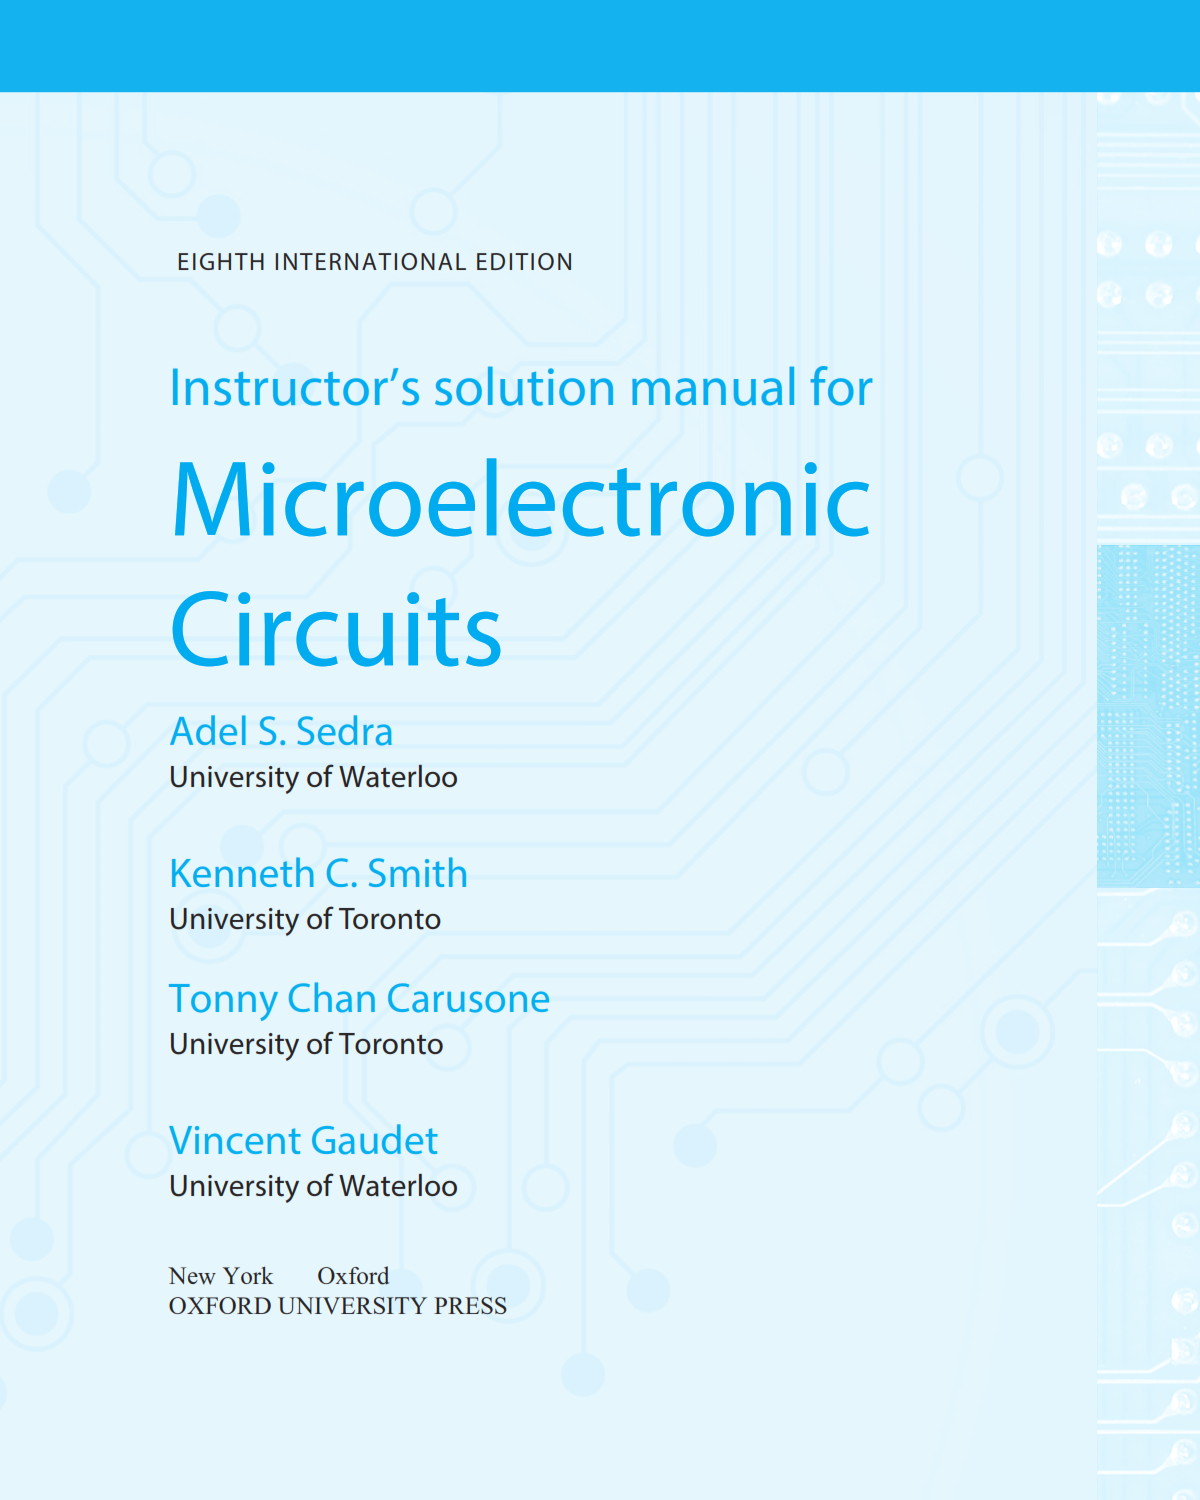 download free Sedra Smith microelectronic circuits 8th edition solutions manual pdf | Gioumeh website solution